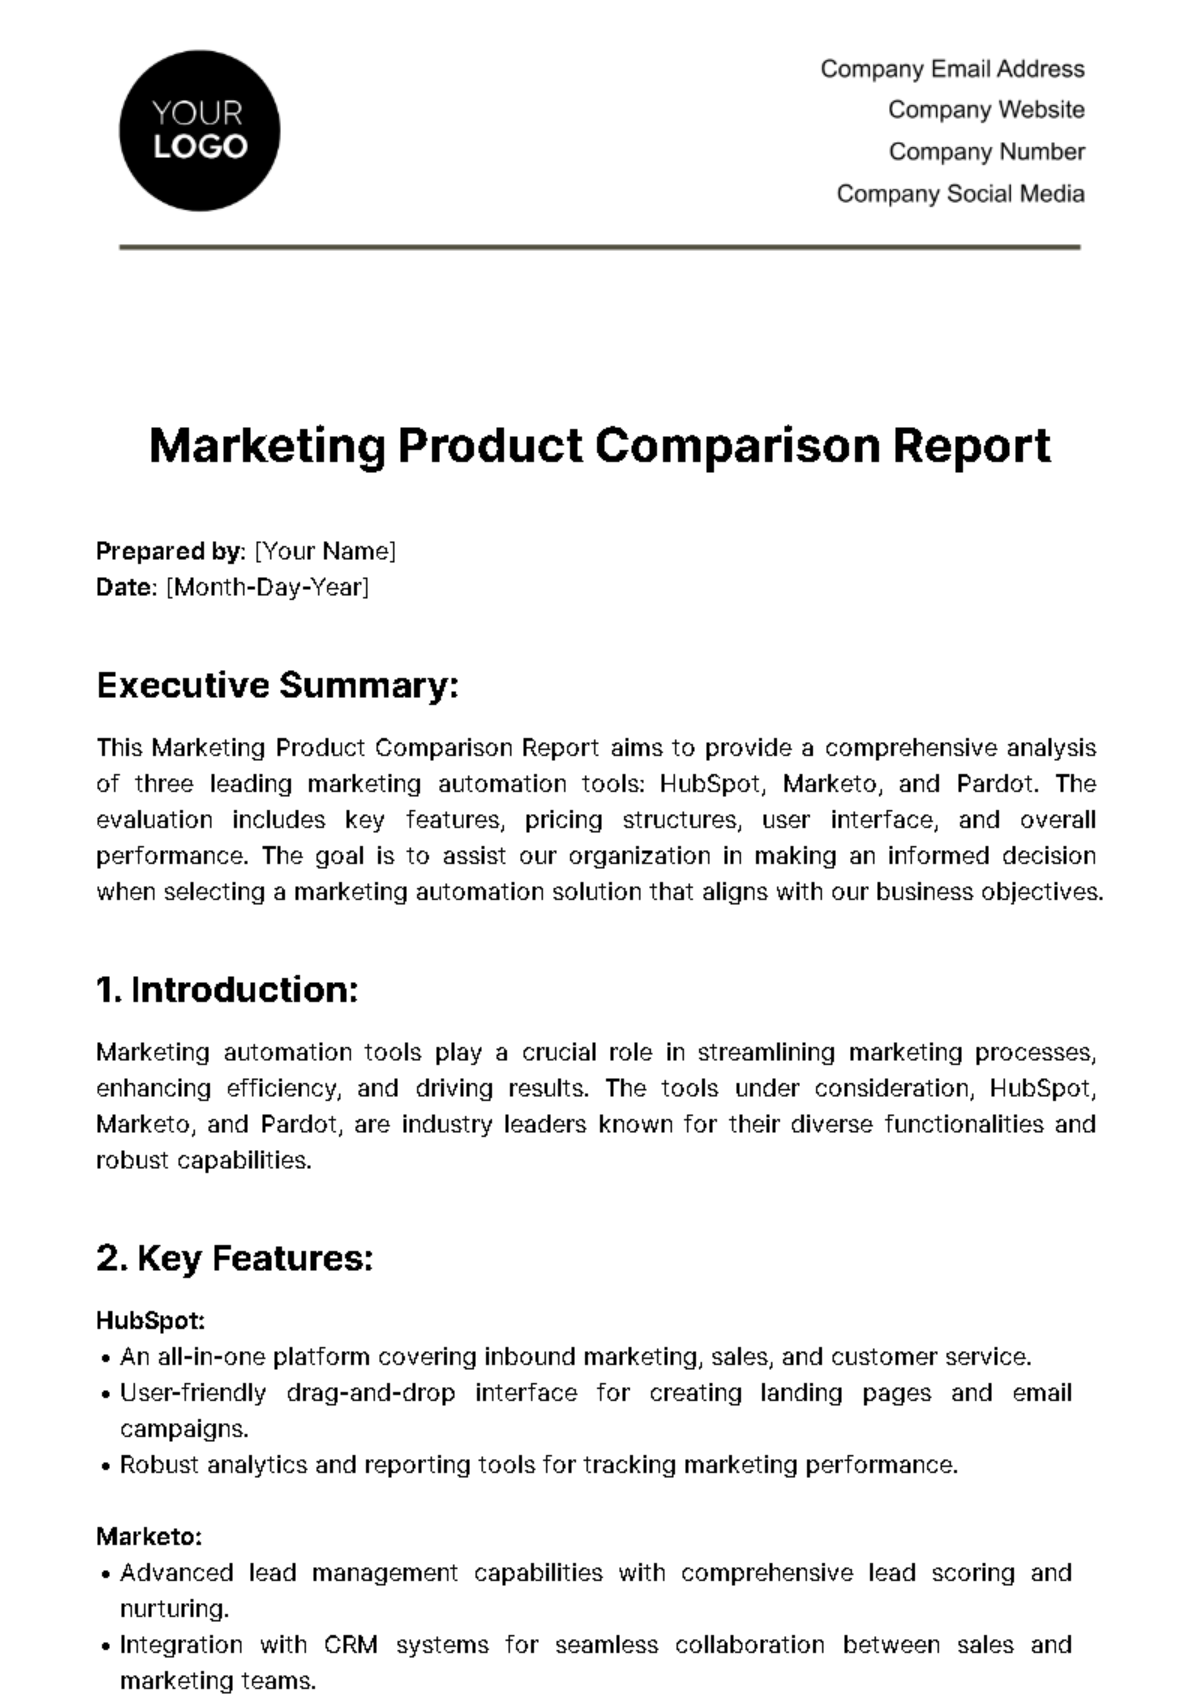 Free Marketing Product Comparison Report Template